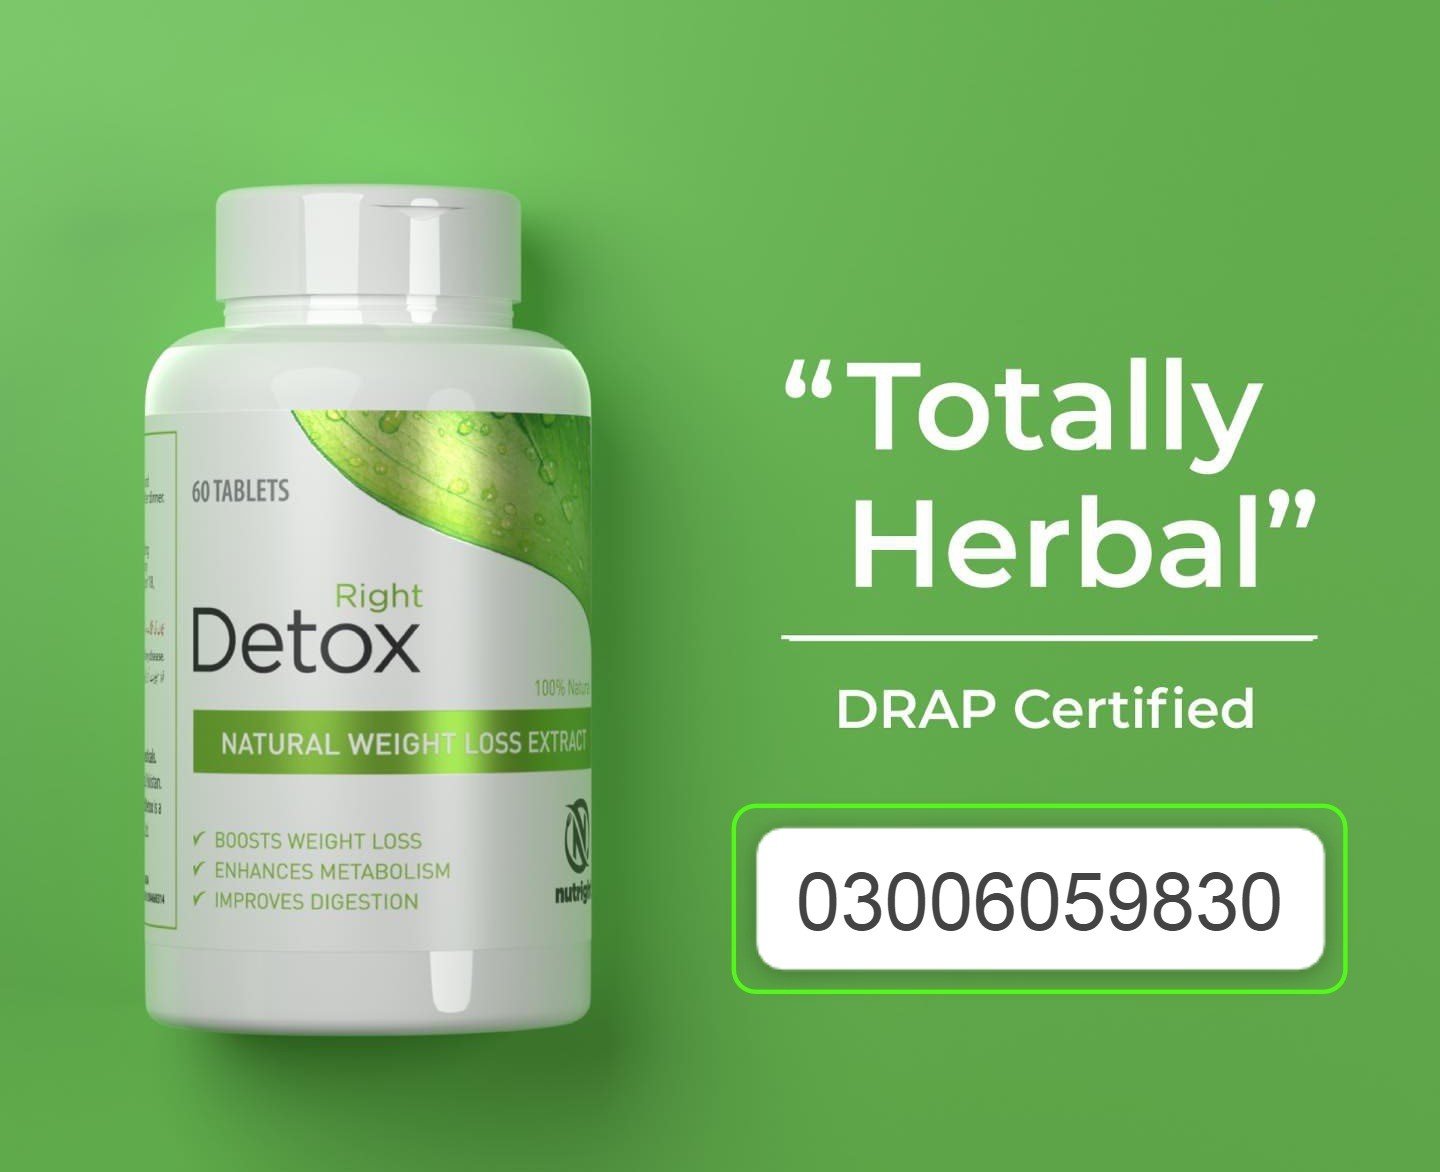 Right Detox - 100% Natural Weight Loss Extract Price In Pakistan-03006059830